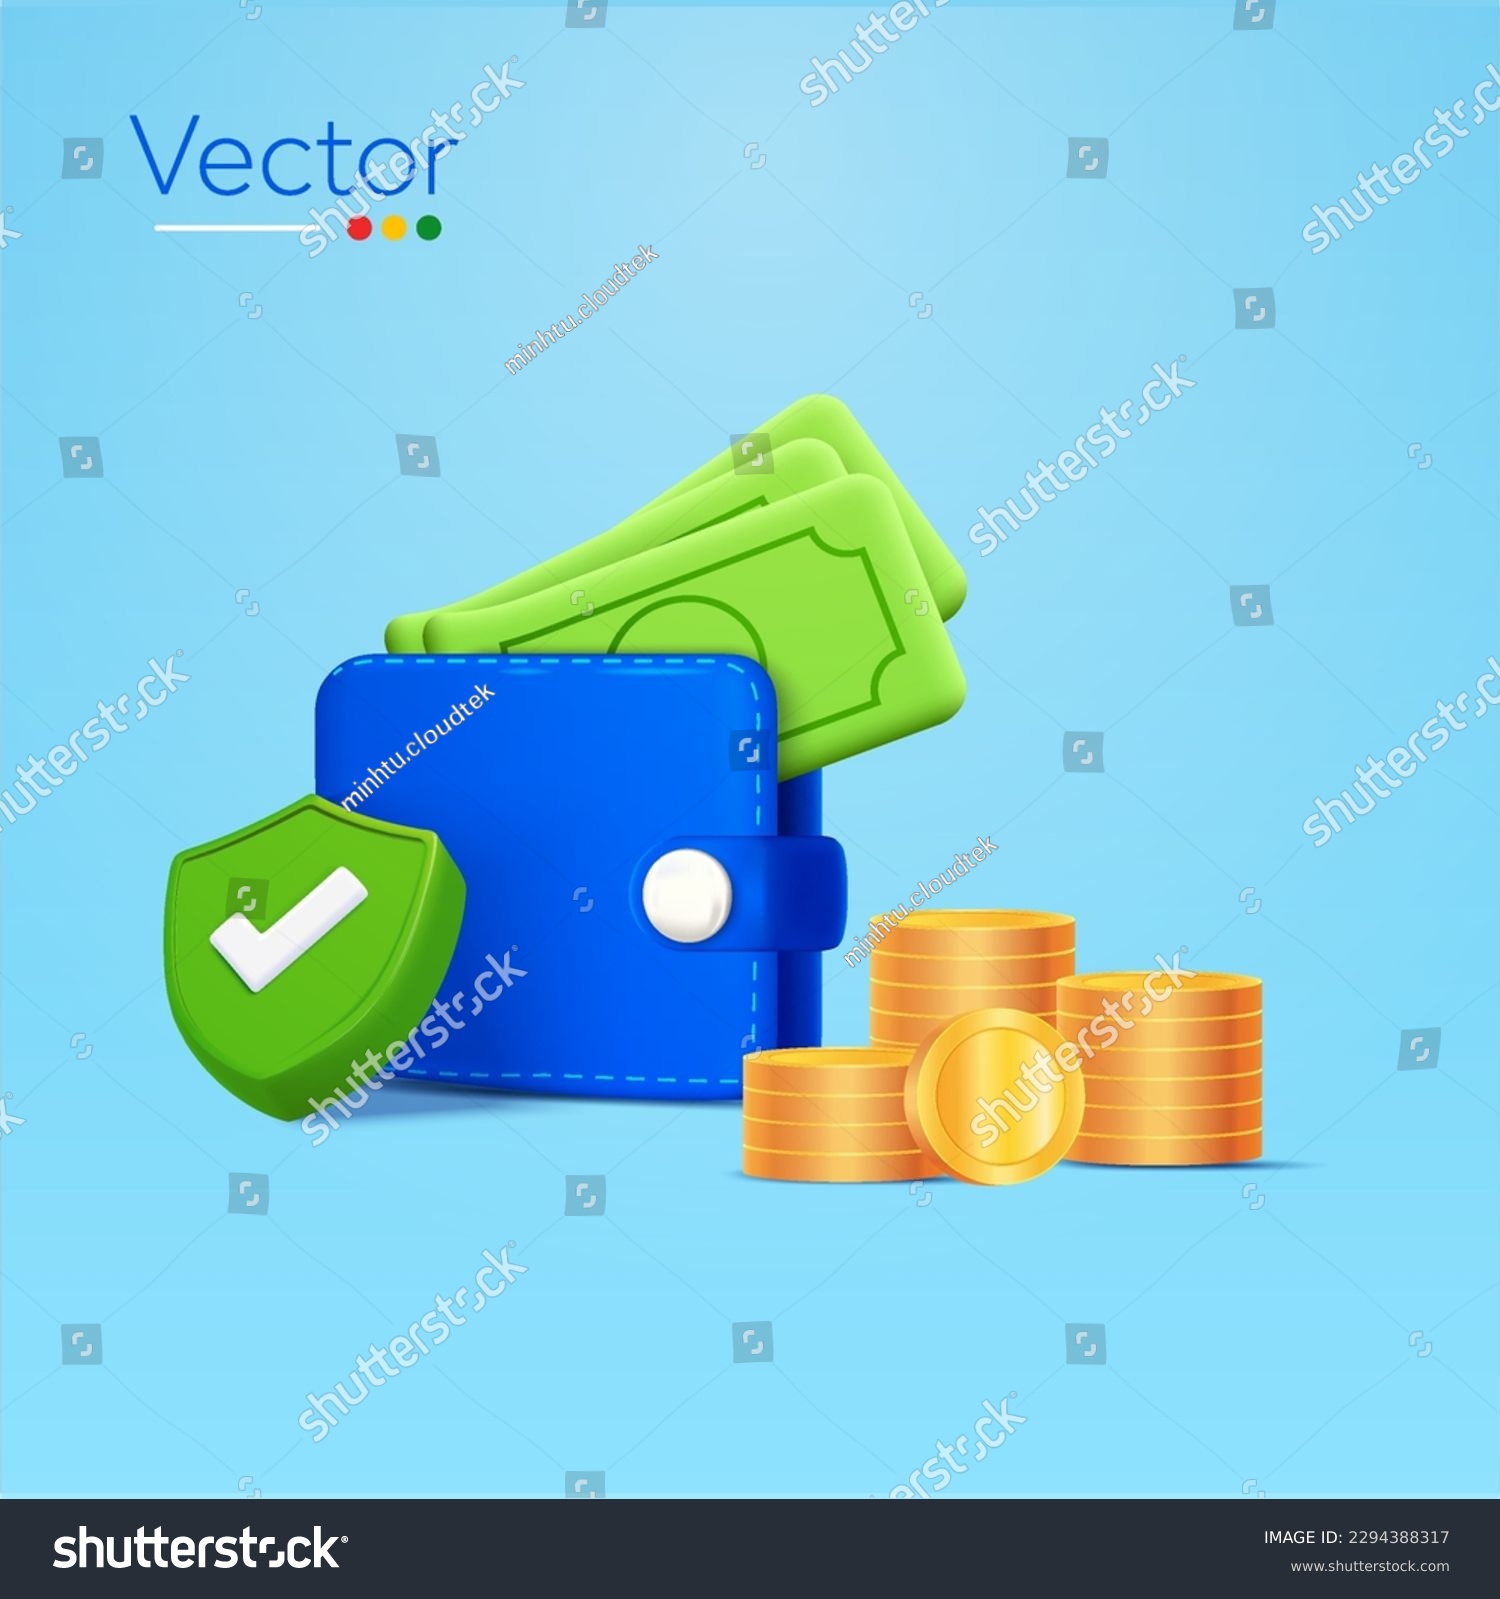 SVG of Digital wallet with dollar, green check mark, coin stacks on the right, isolated on background. Minimal design concept for finance, business advertising. 3d vector illustration svg